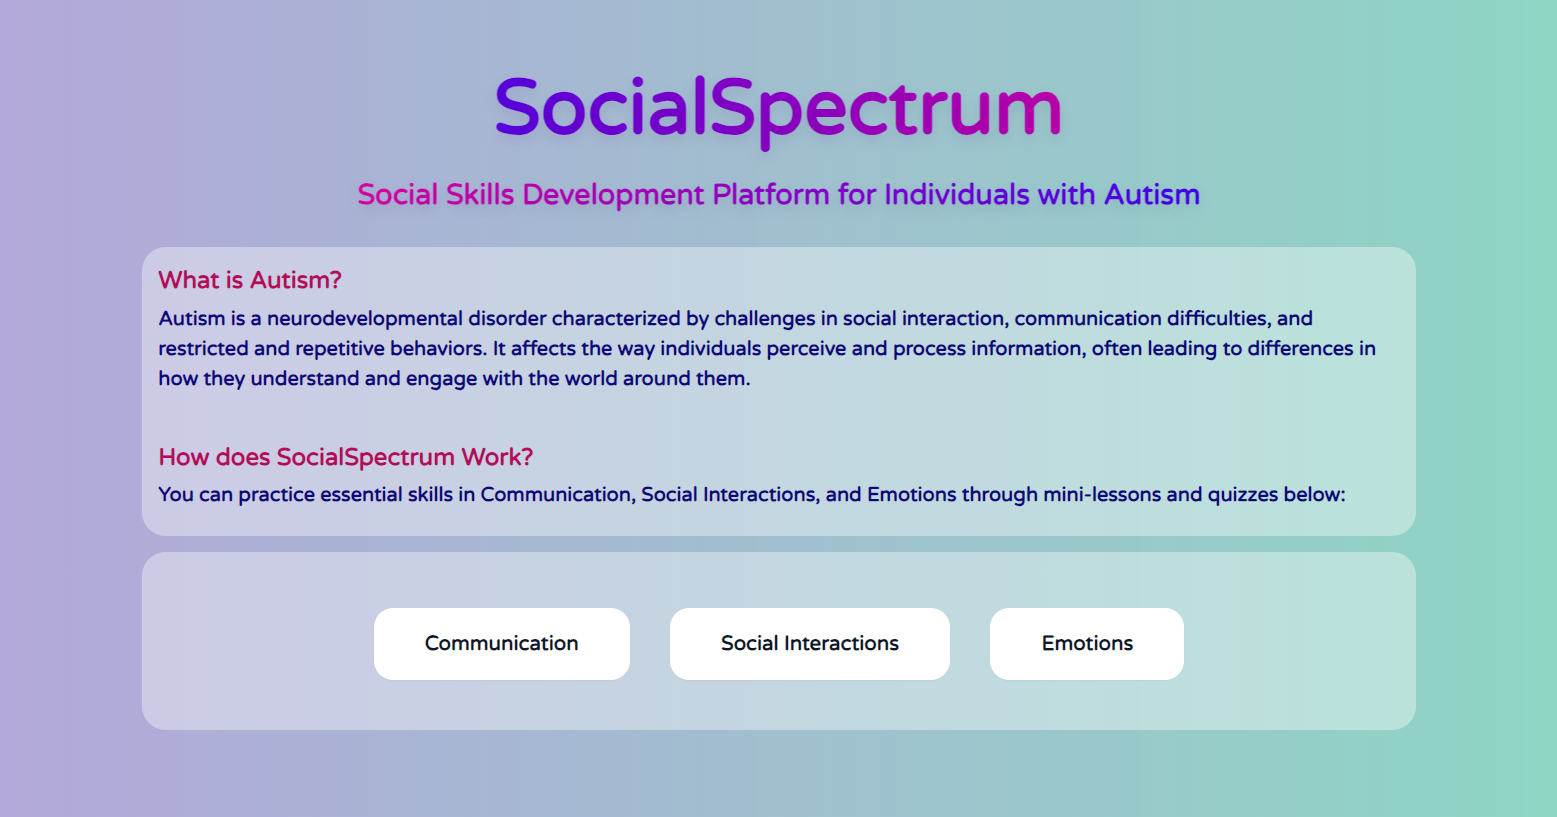 SocialSpectrum: Helping Individuals With Autism Master Social Interactions